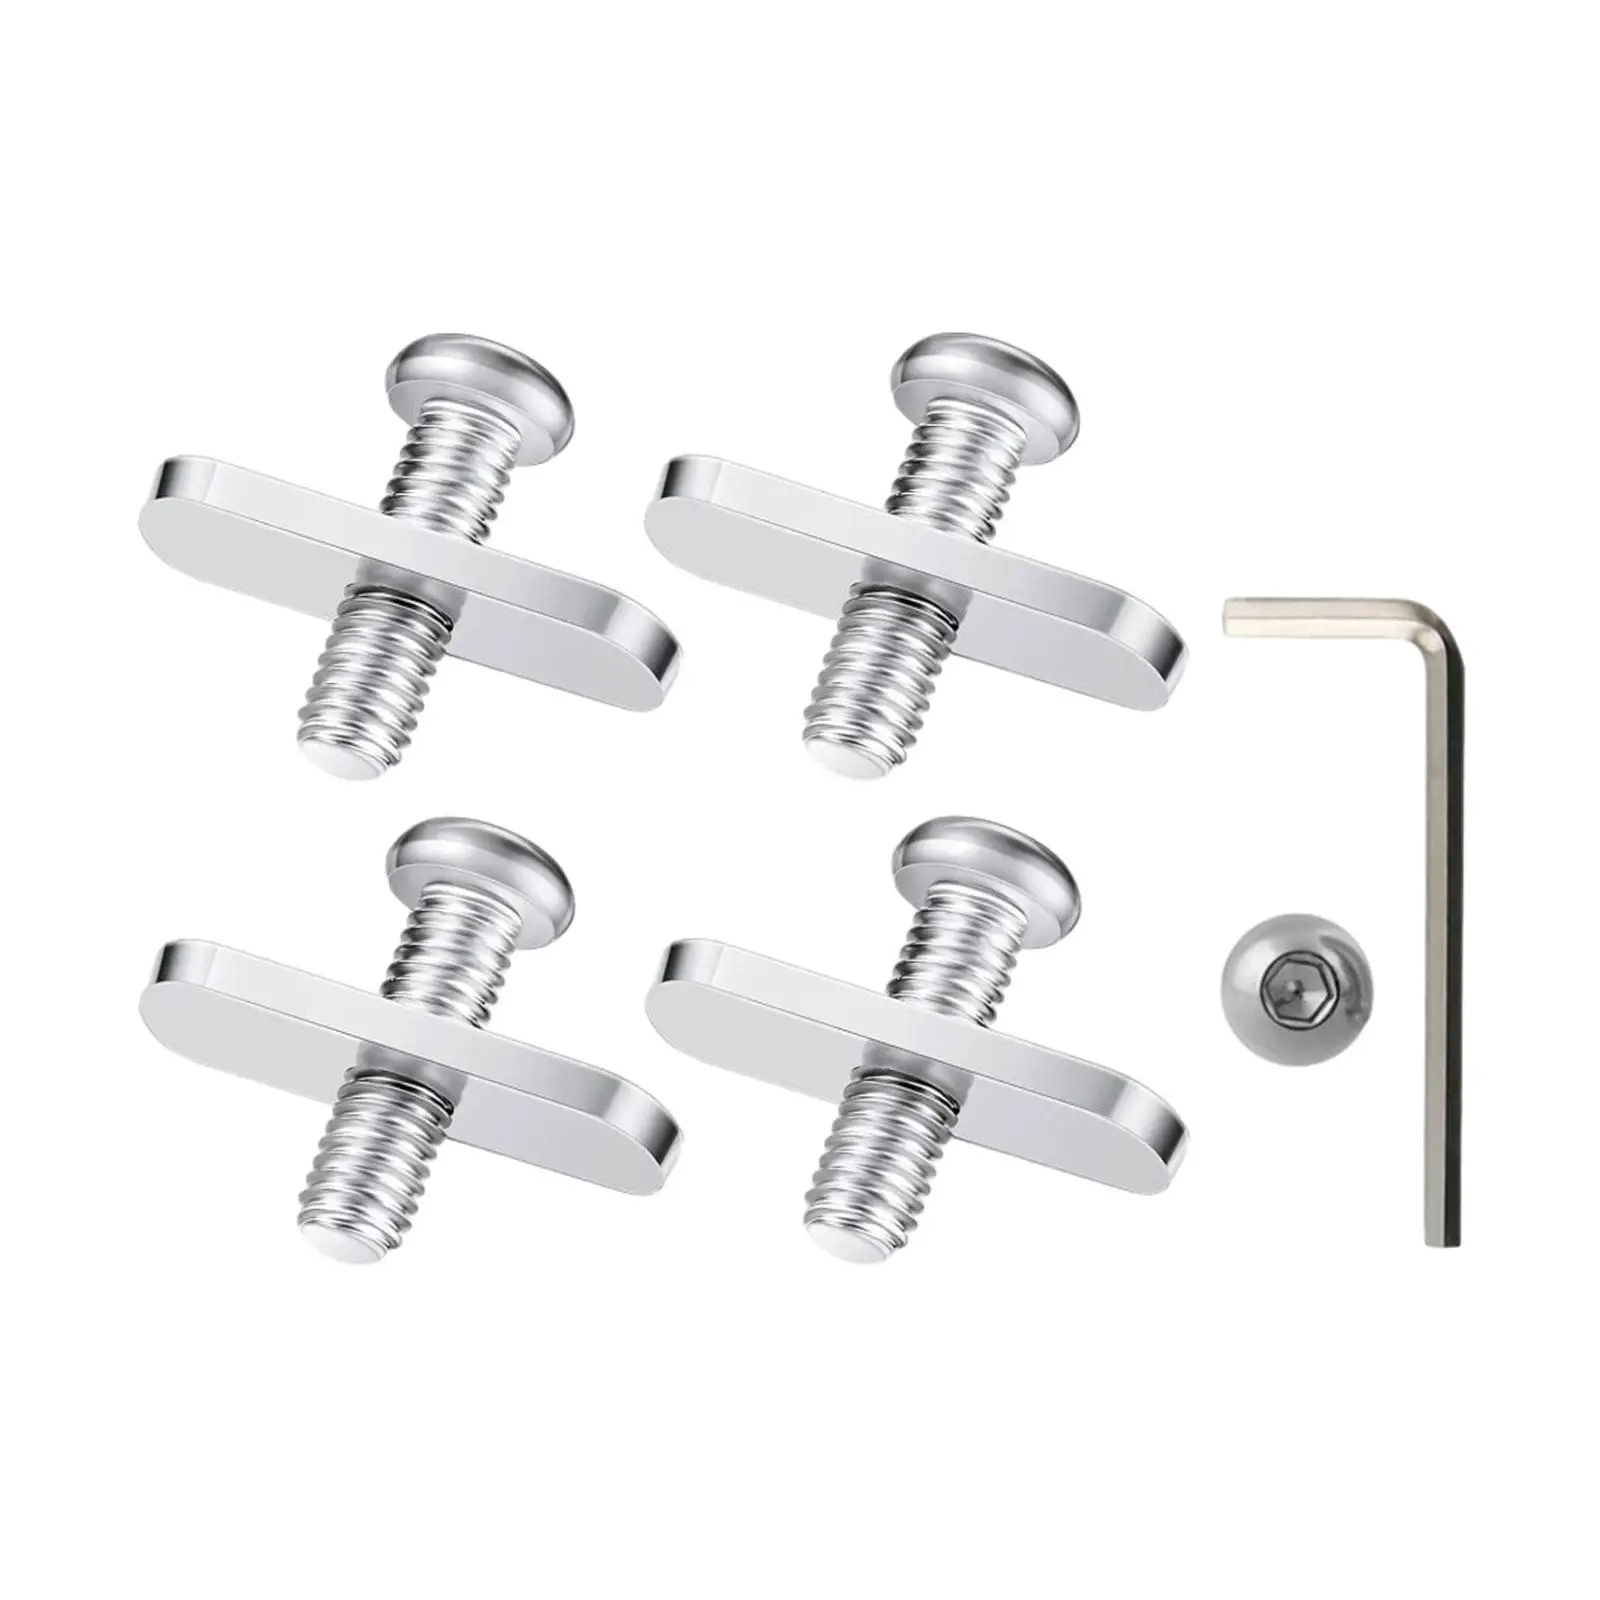 4 Pack Kayak Rail Track Screws Track Nuts Mounting Stainless Steel Mini Hardware Gear Kayak Screws for Dinghy Boats Canoes Rail